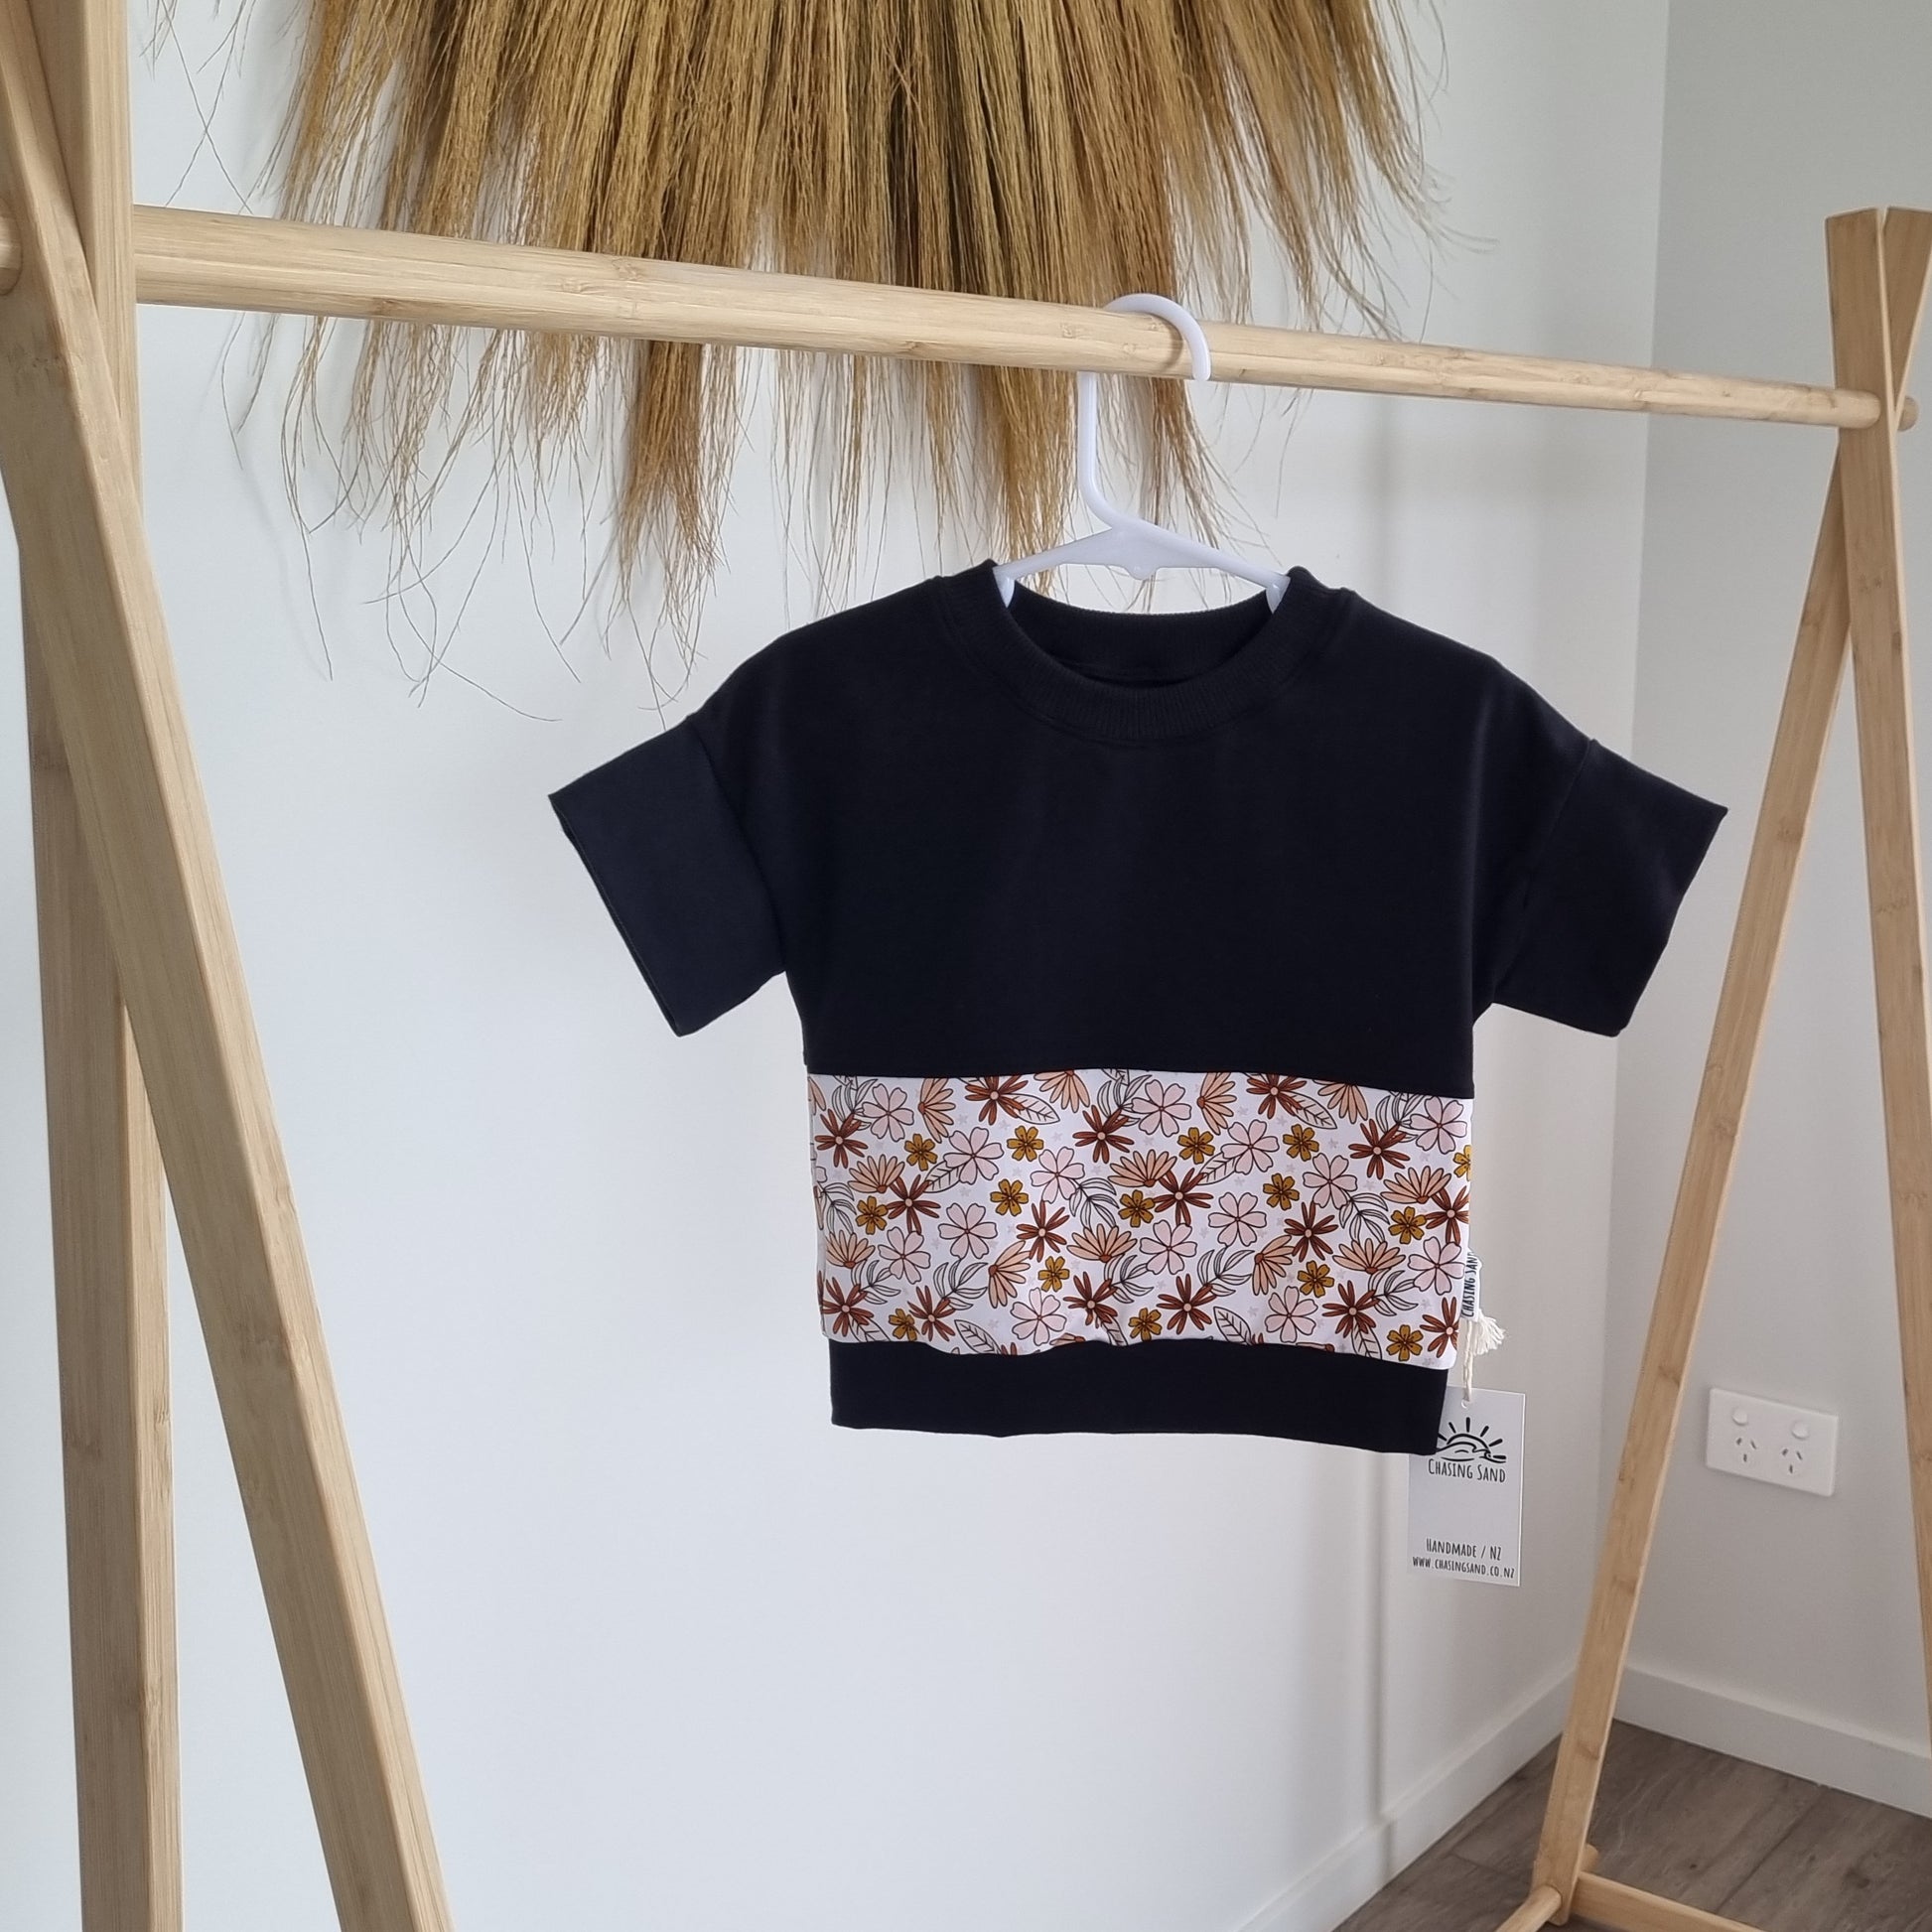 Tee - Sophie hanging on wooden rack. Black t-shirt with pattern around the middle: Brown, pink and orange flowers on white background